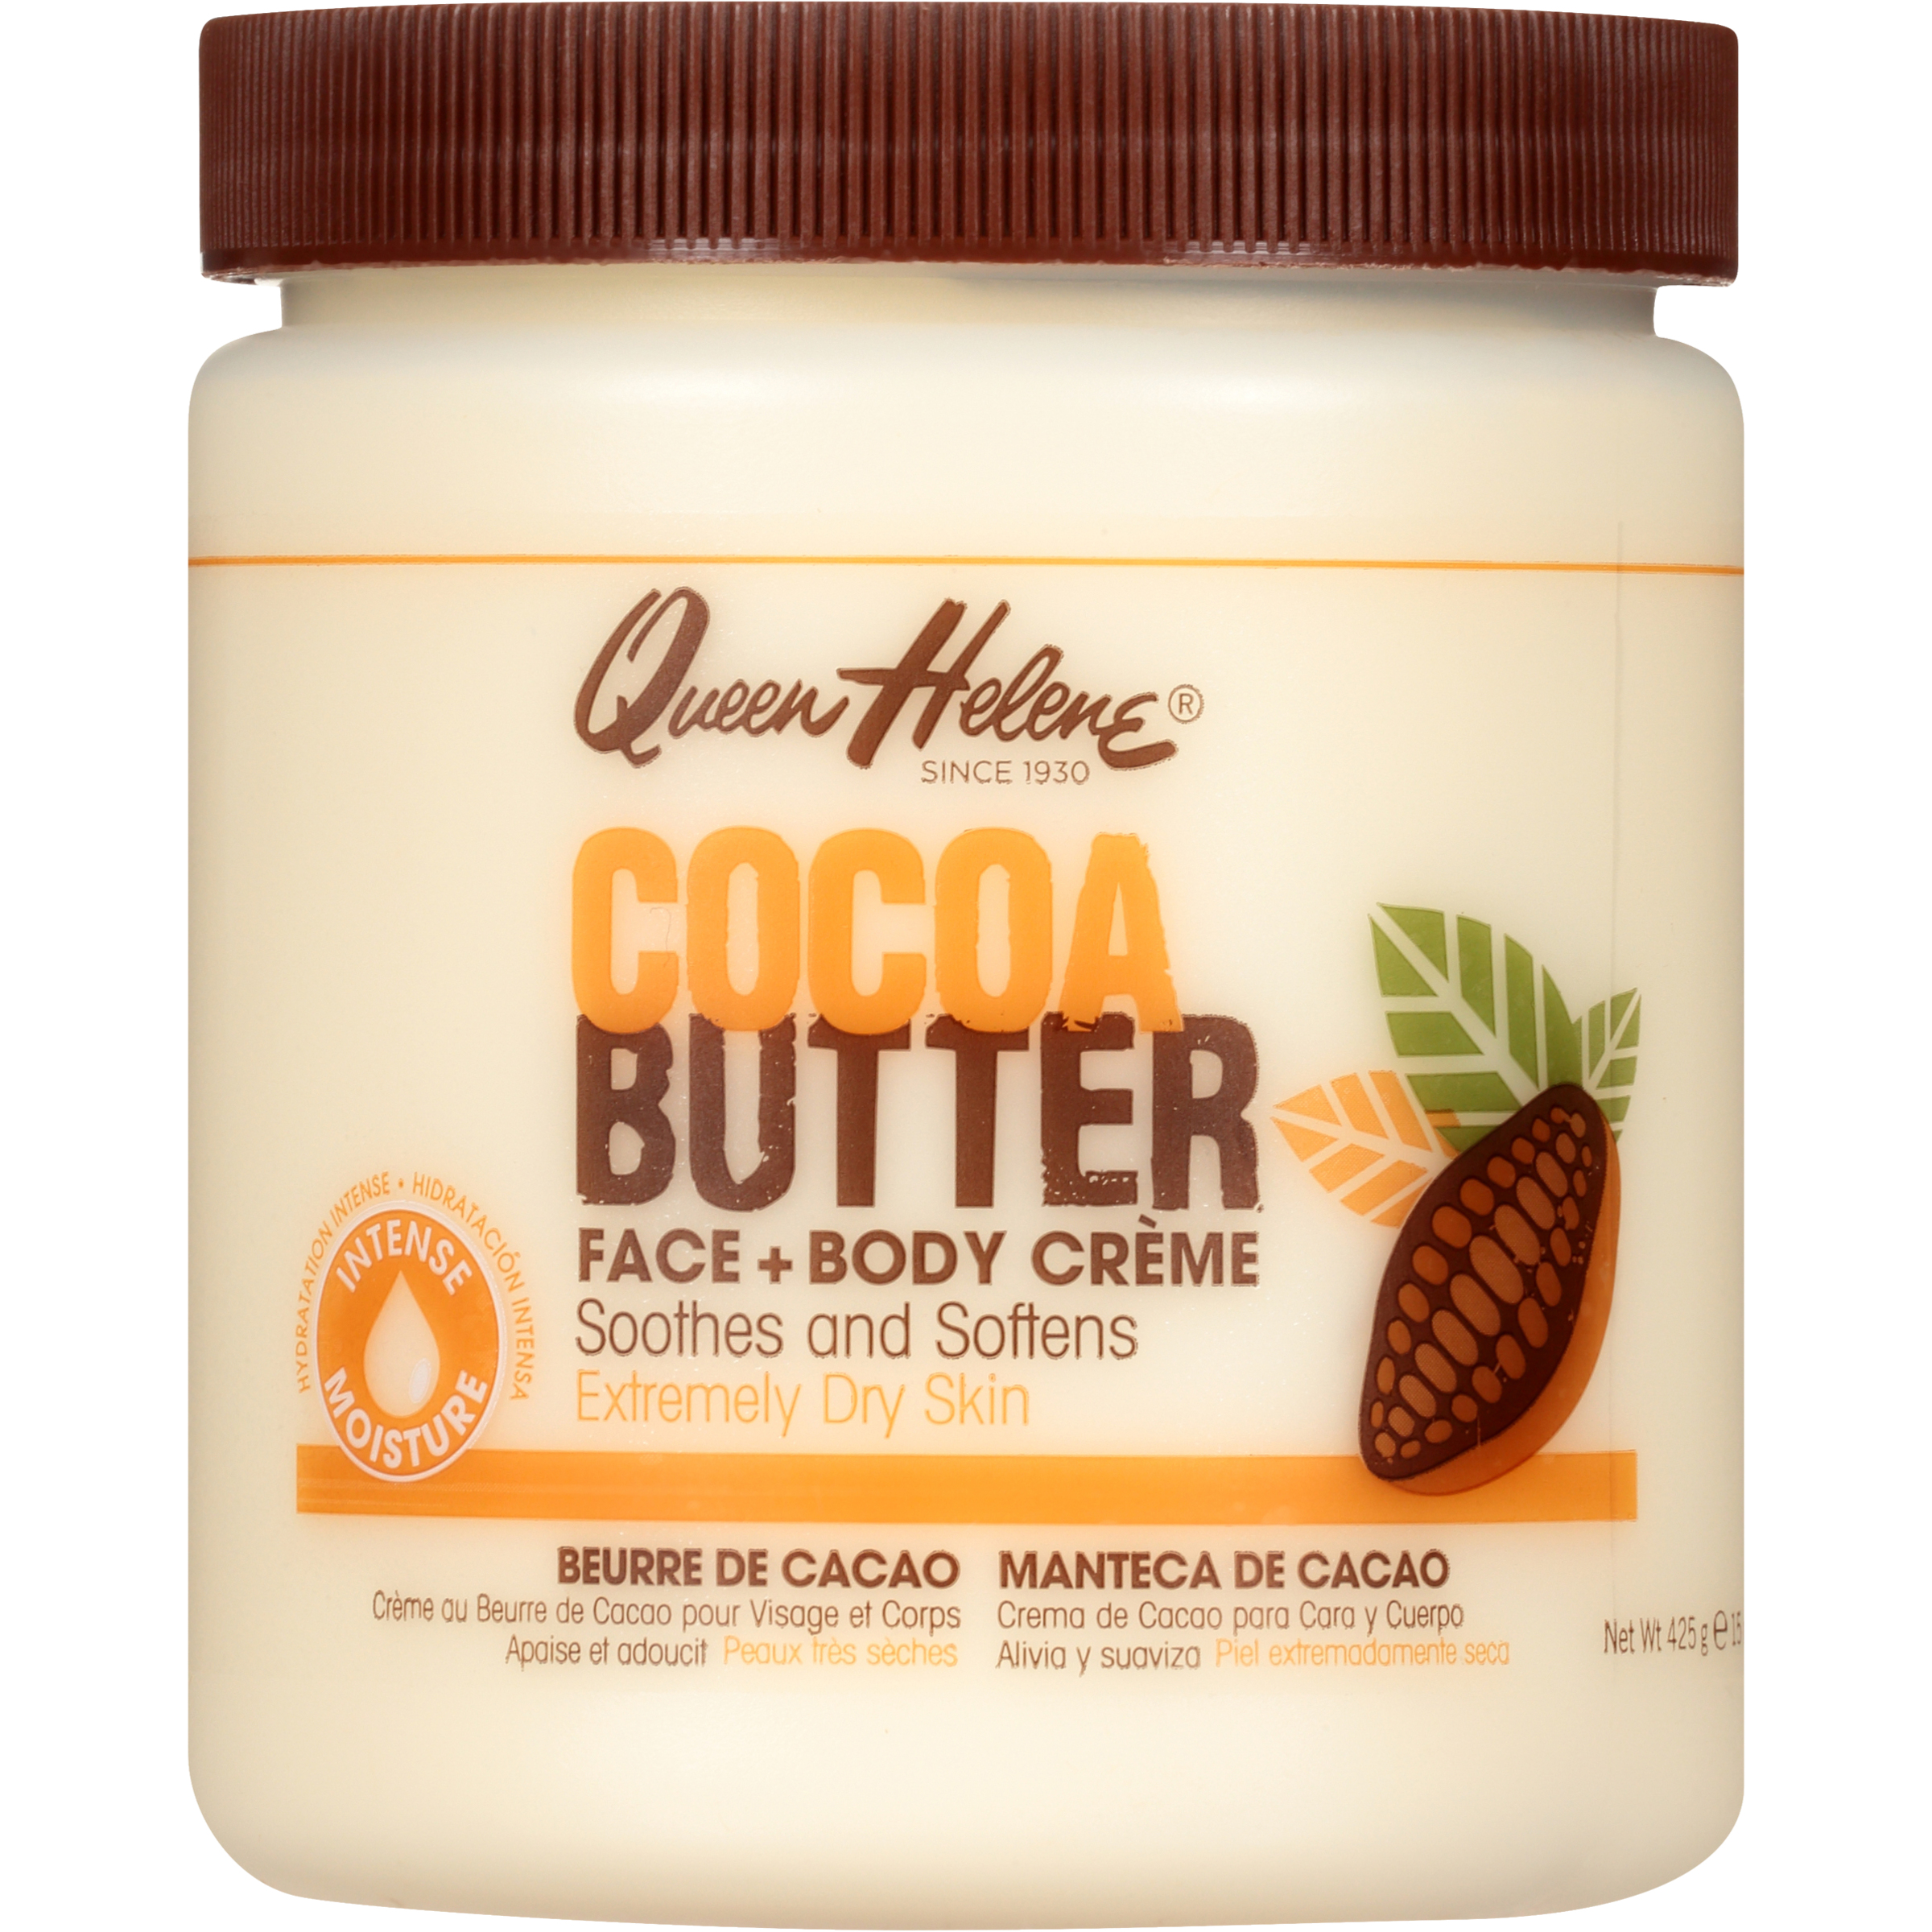 Queen Helene Cocoa Butter Crème Face & Body Lotion for Dry Skin, 15 oz - image 1 of 6